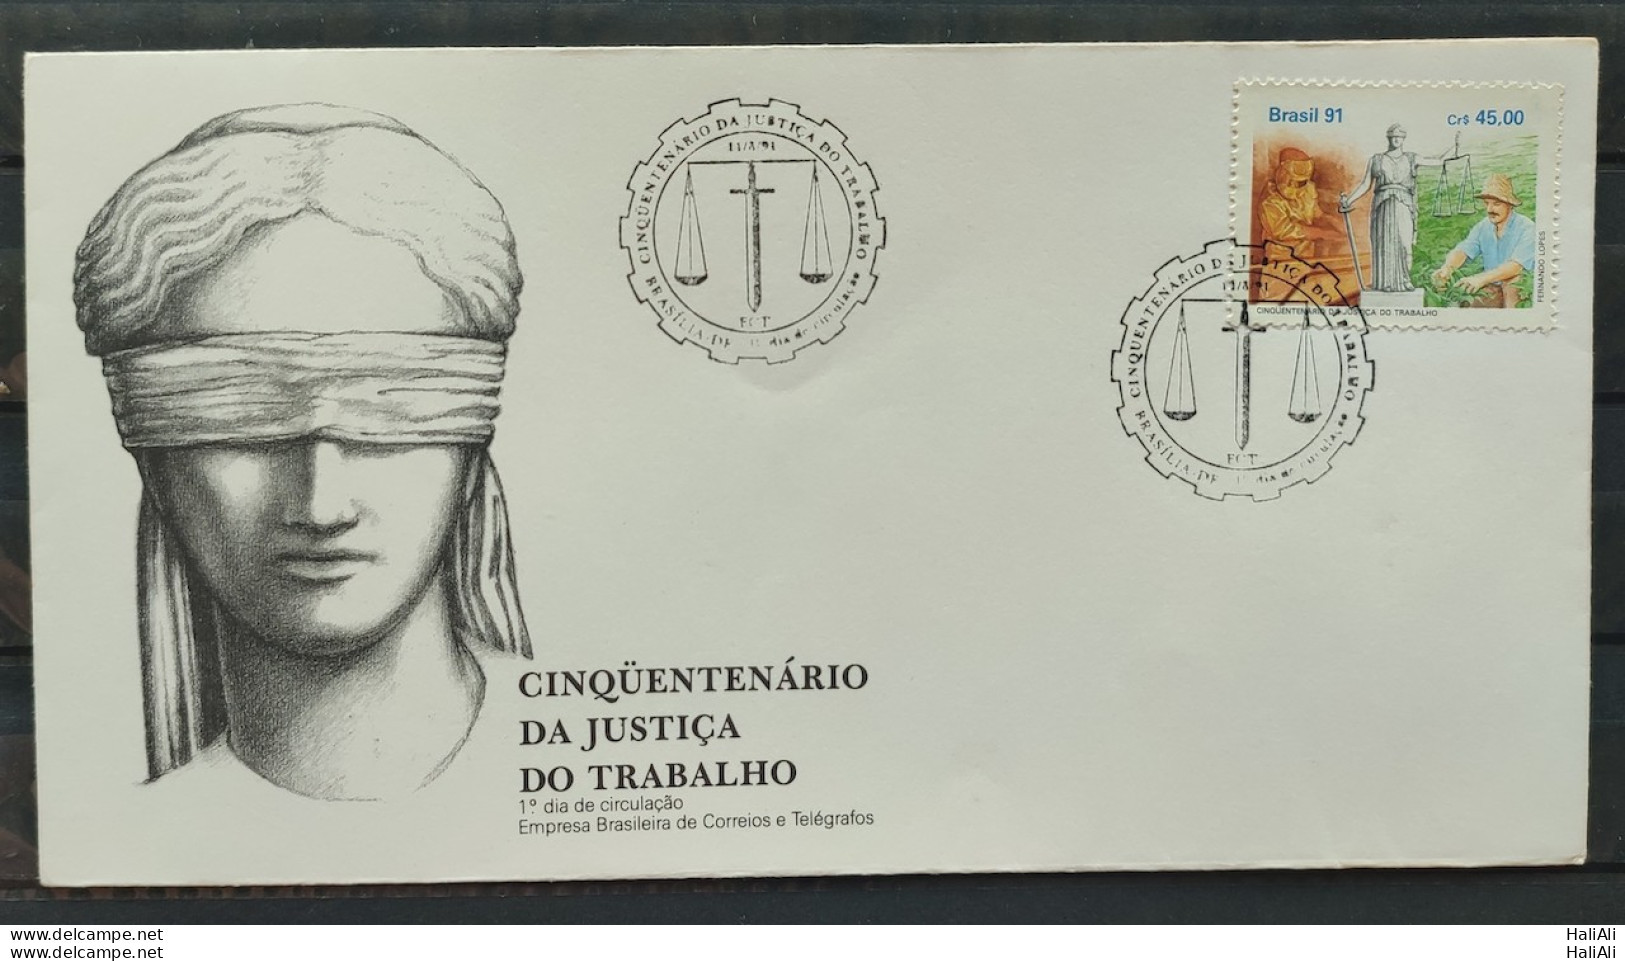 Brazil Envelope FDC FDC 537 1991 JUSTICE OF WORK LAW Hat CBC DF - FDC